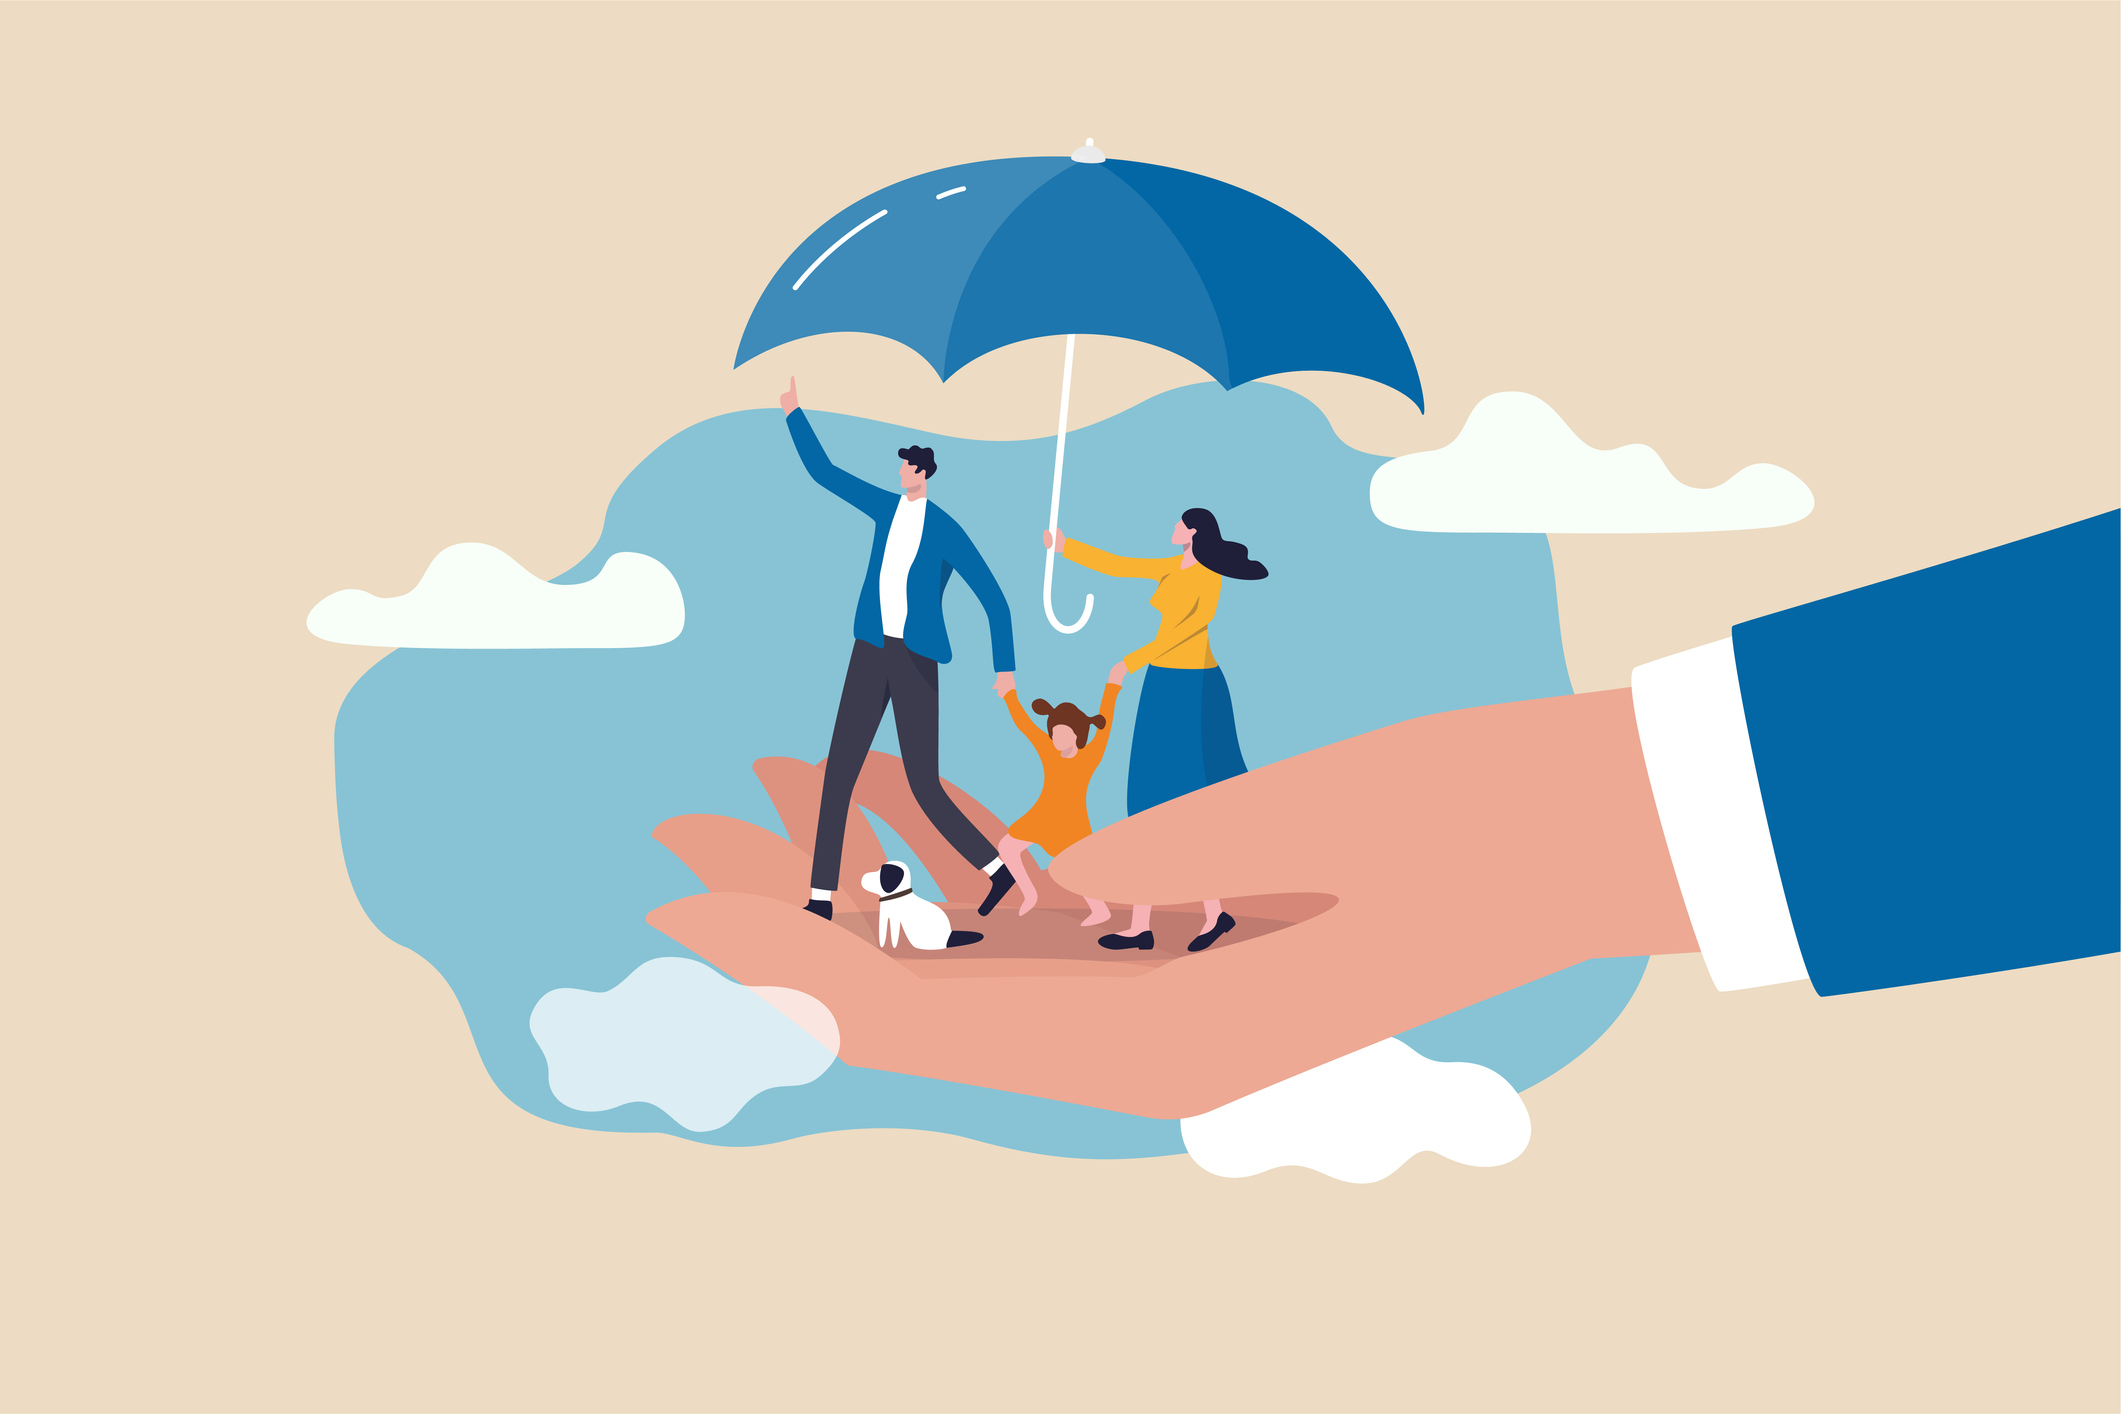 Vector image of a family holding an umbrella above their hands while balancing on a giant hand